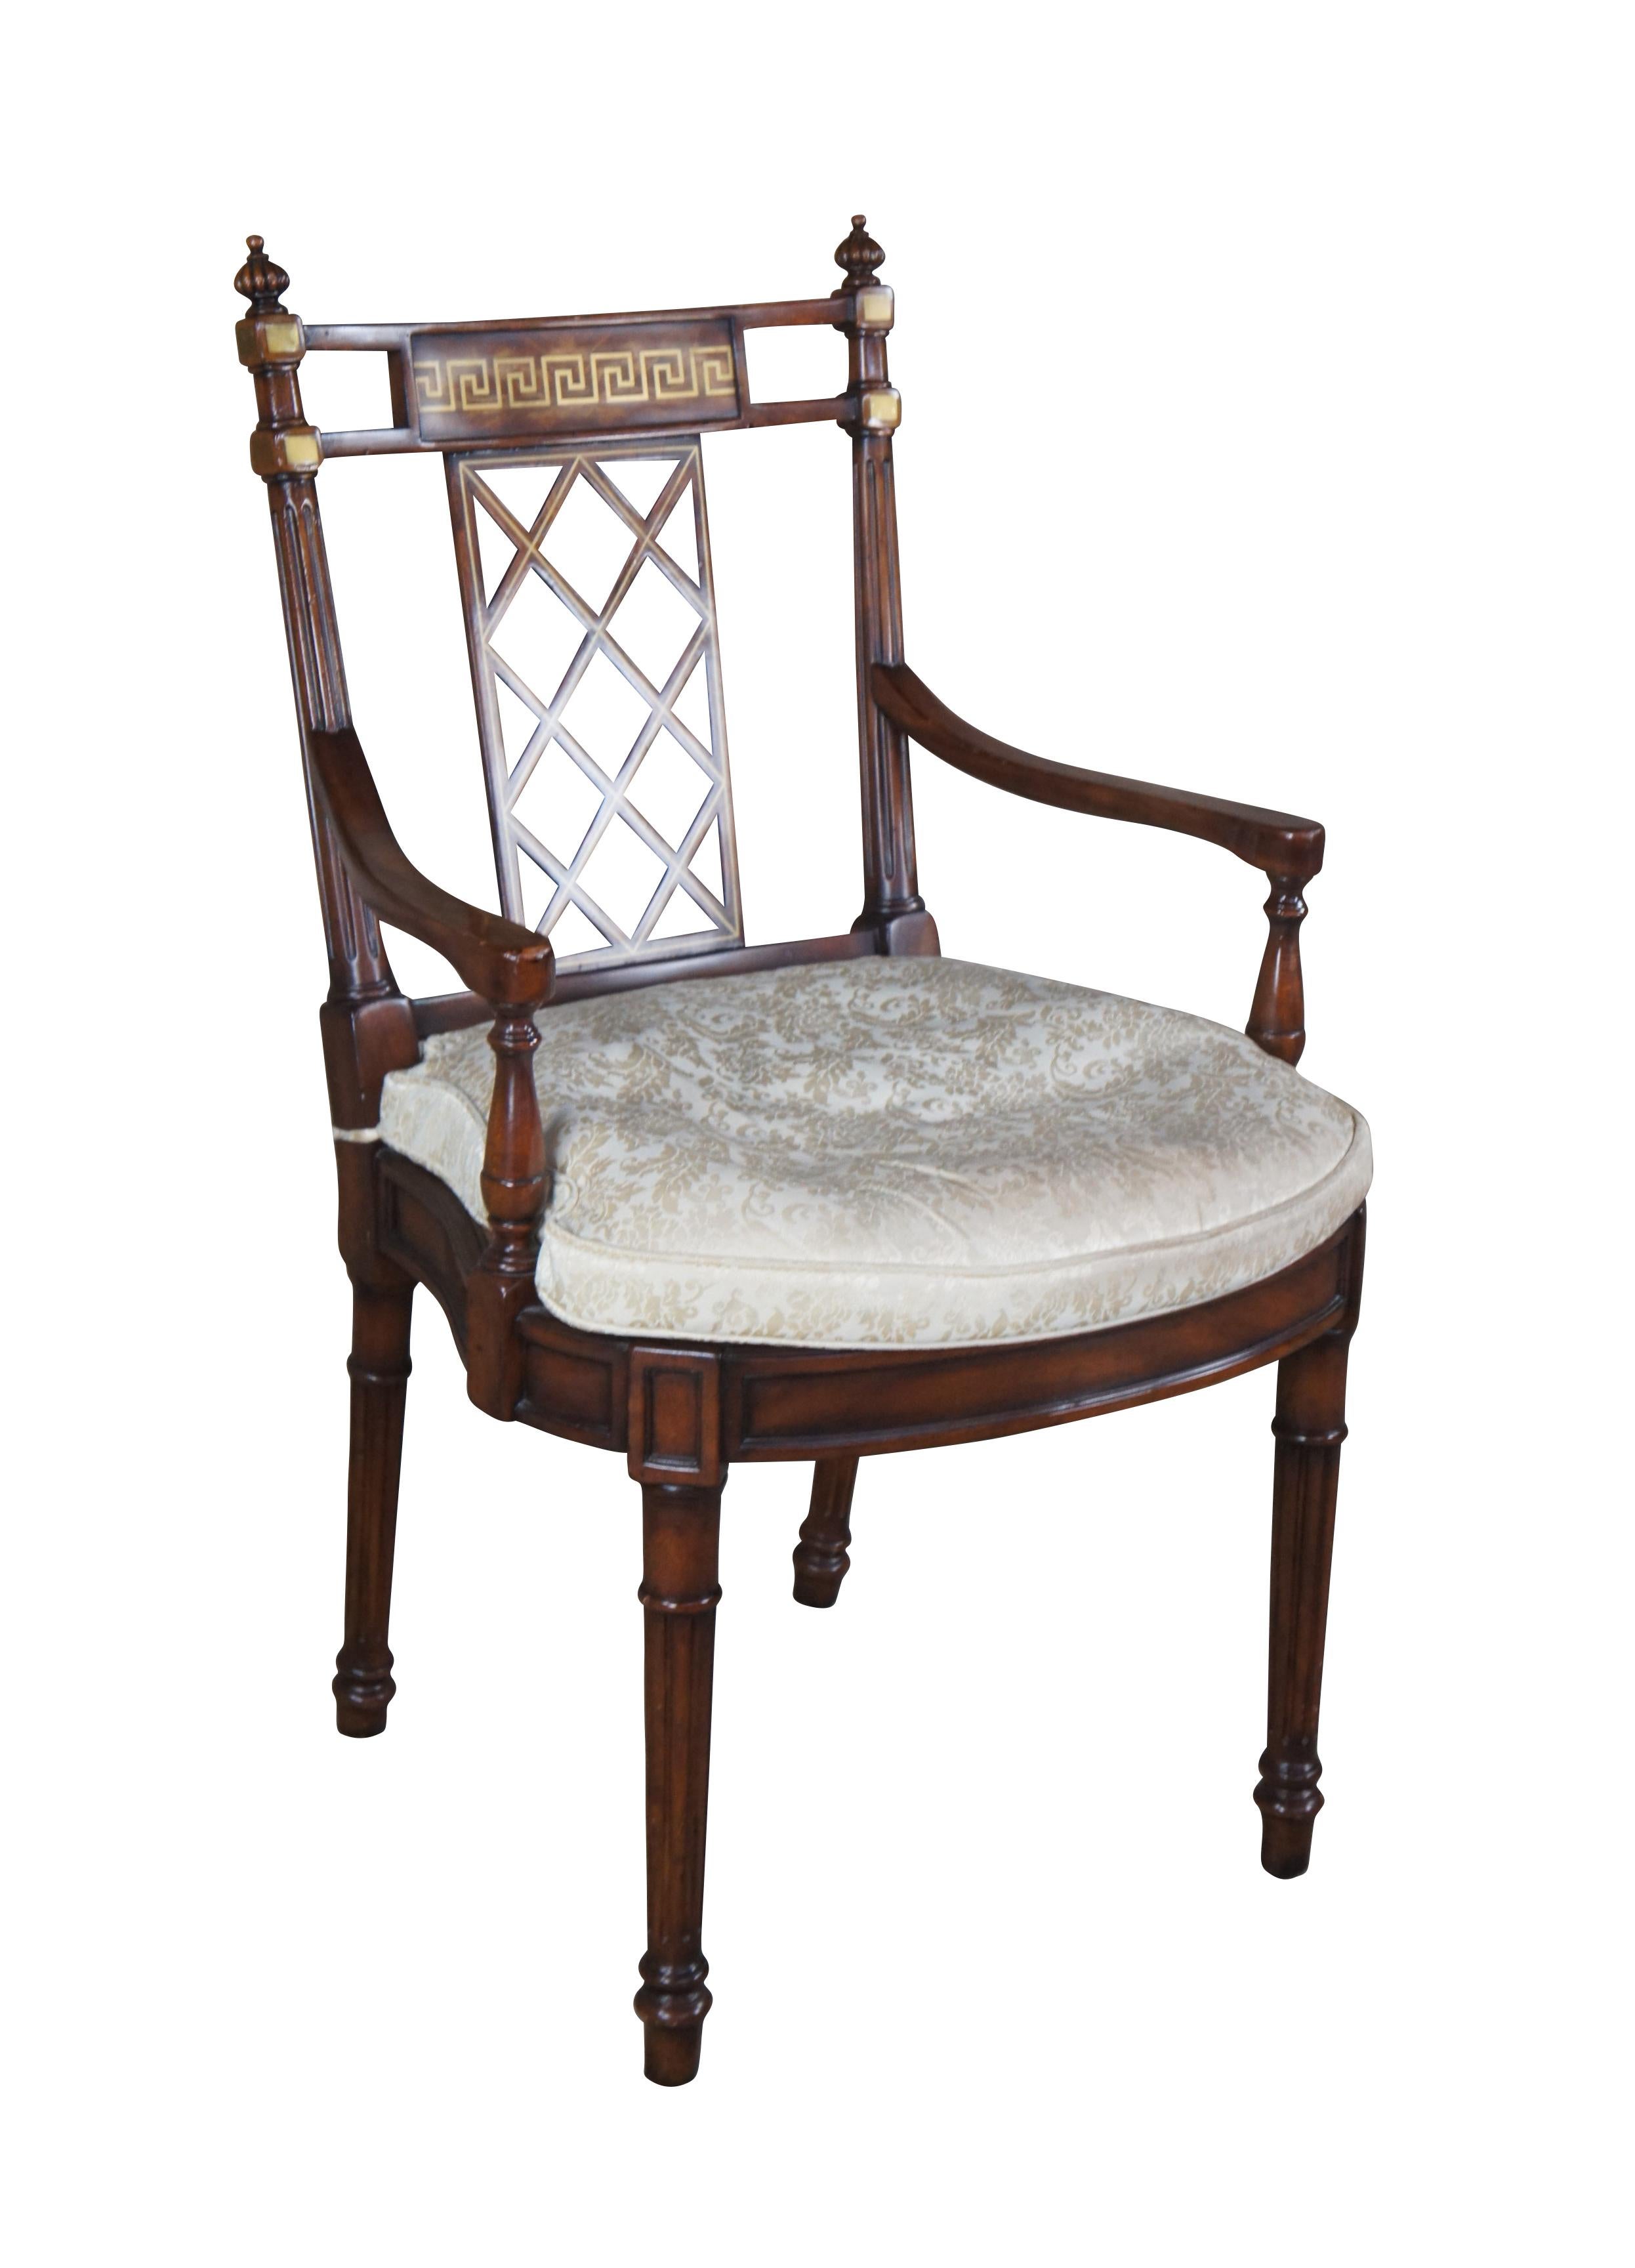 A fine vintage Theodore Alexander flame mahogany armchair featuring a trellis pierced splat back with Greek key brass inlay, caned seat with a cream / gold / tan damask down filled cushion over turned reeded legs. 4100-511

Dimensions:
23